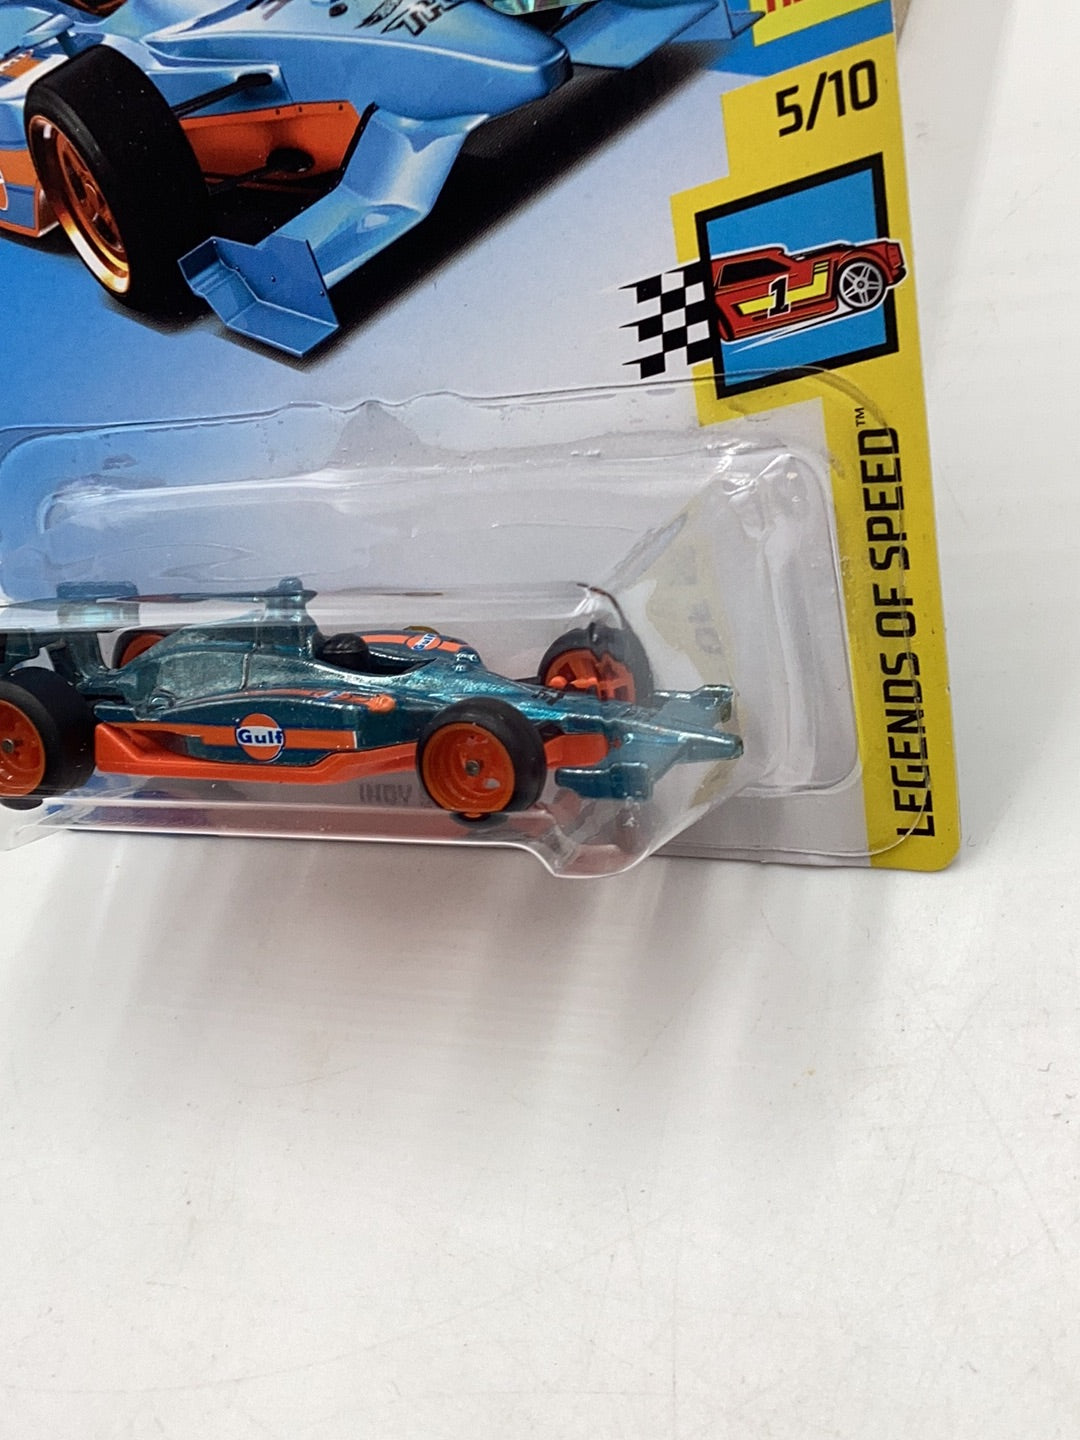 2018 hot wheels super treasure hunt Indy 500 Oval factory sealed sticker W/Protector